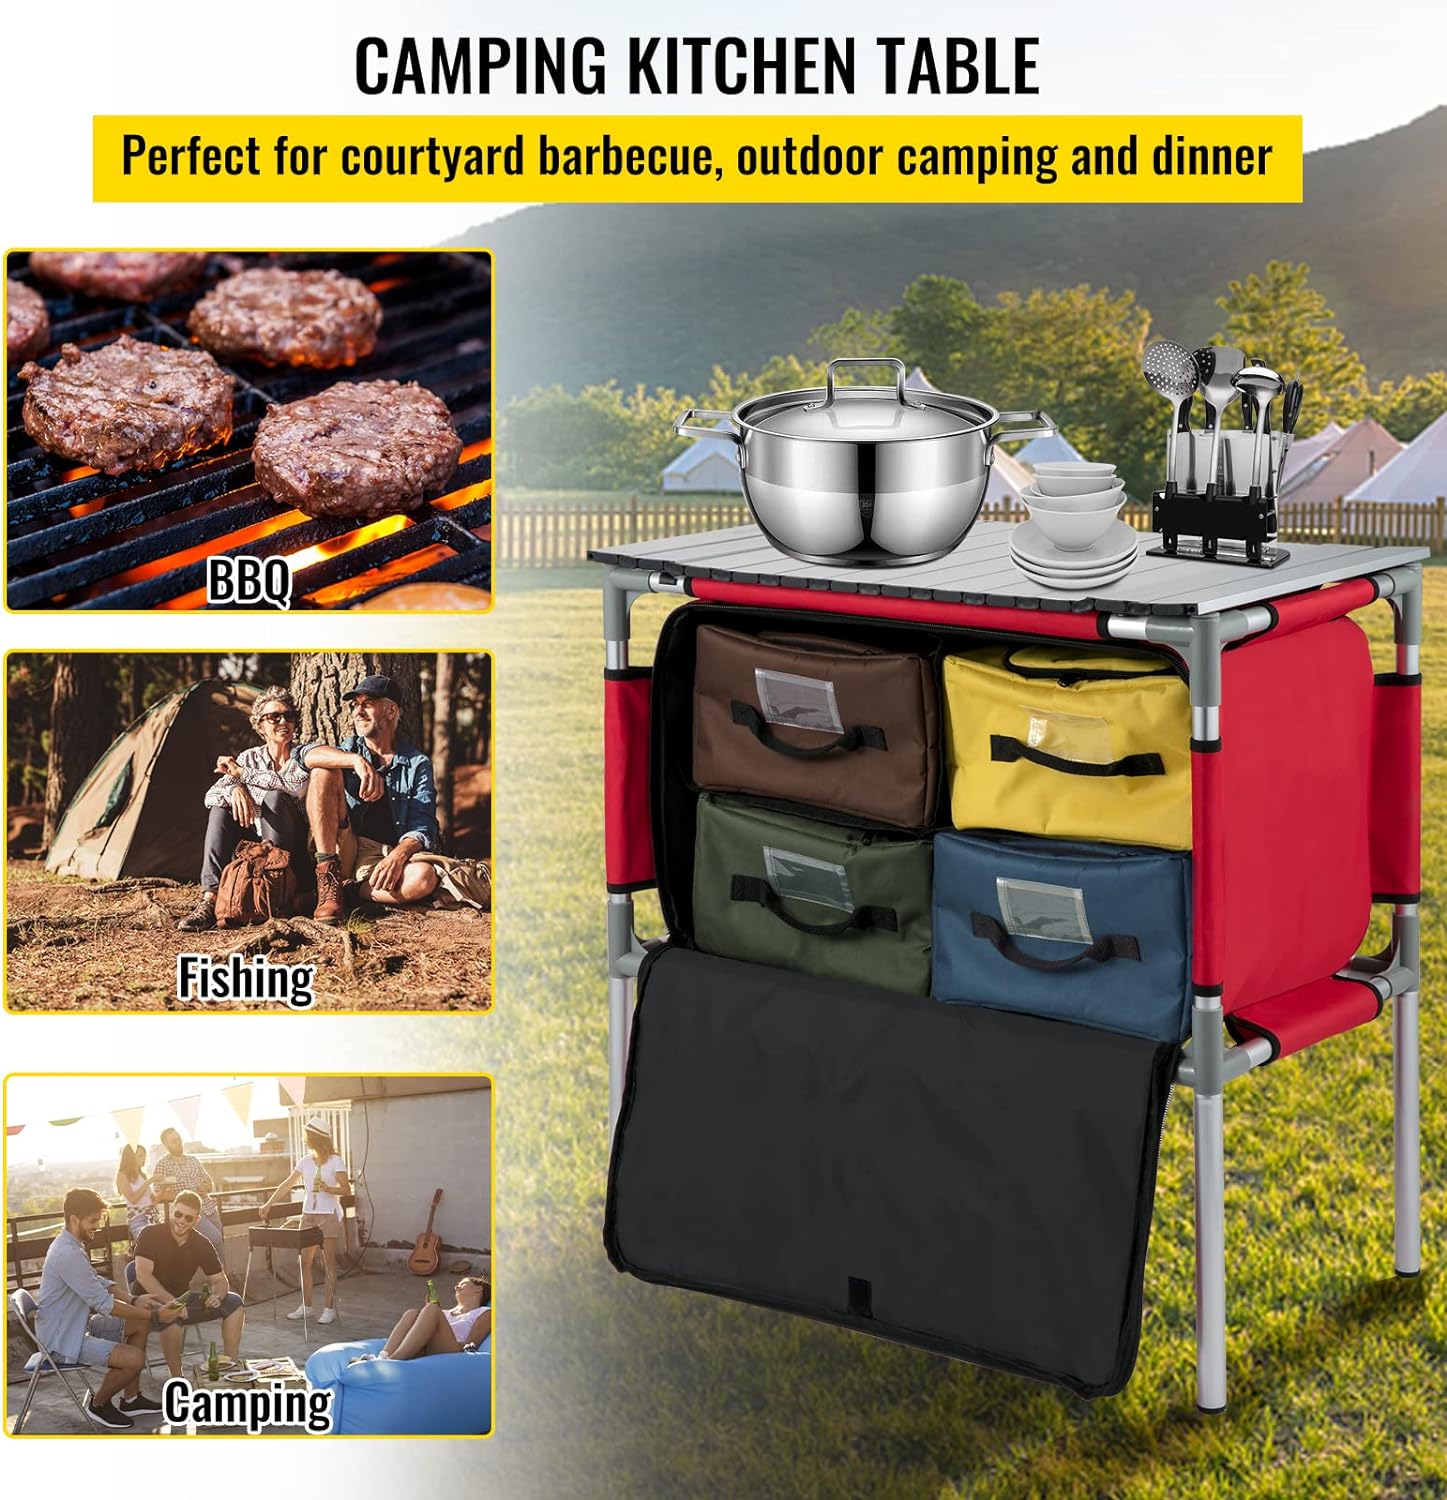 VEVOR Outdoor Camping Storage Organizer, Aluminum Portable Kitchen Table, Folding Station w/ 4 Storage, 4 Detachable Legs & Carry Bag, Quick Installation for Picnic Beach Party Cooking, Red